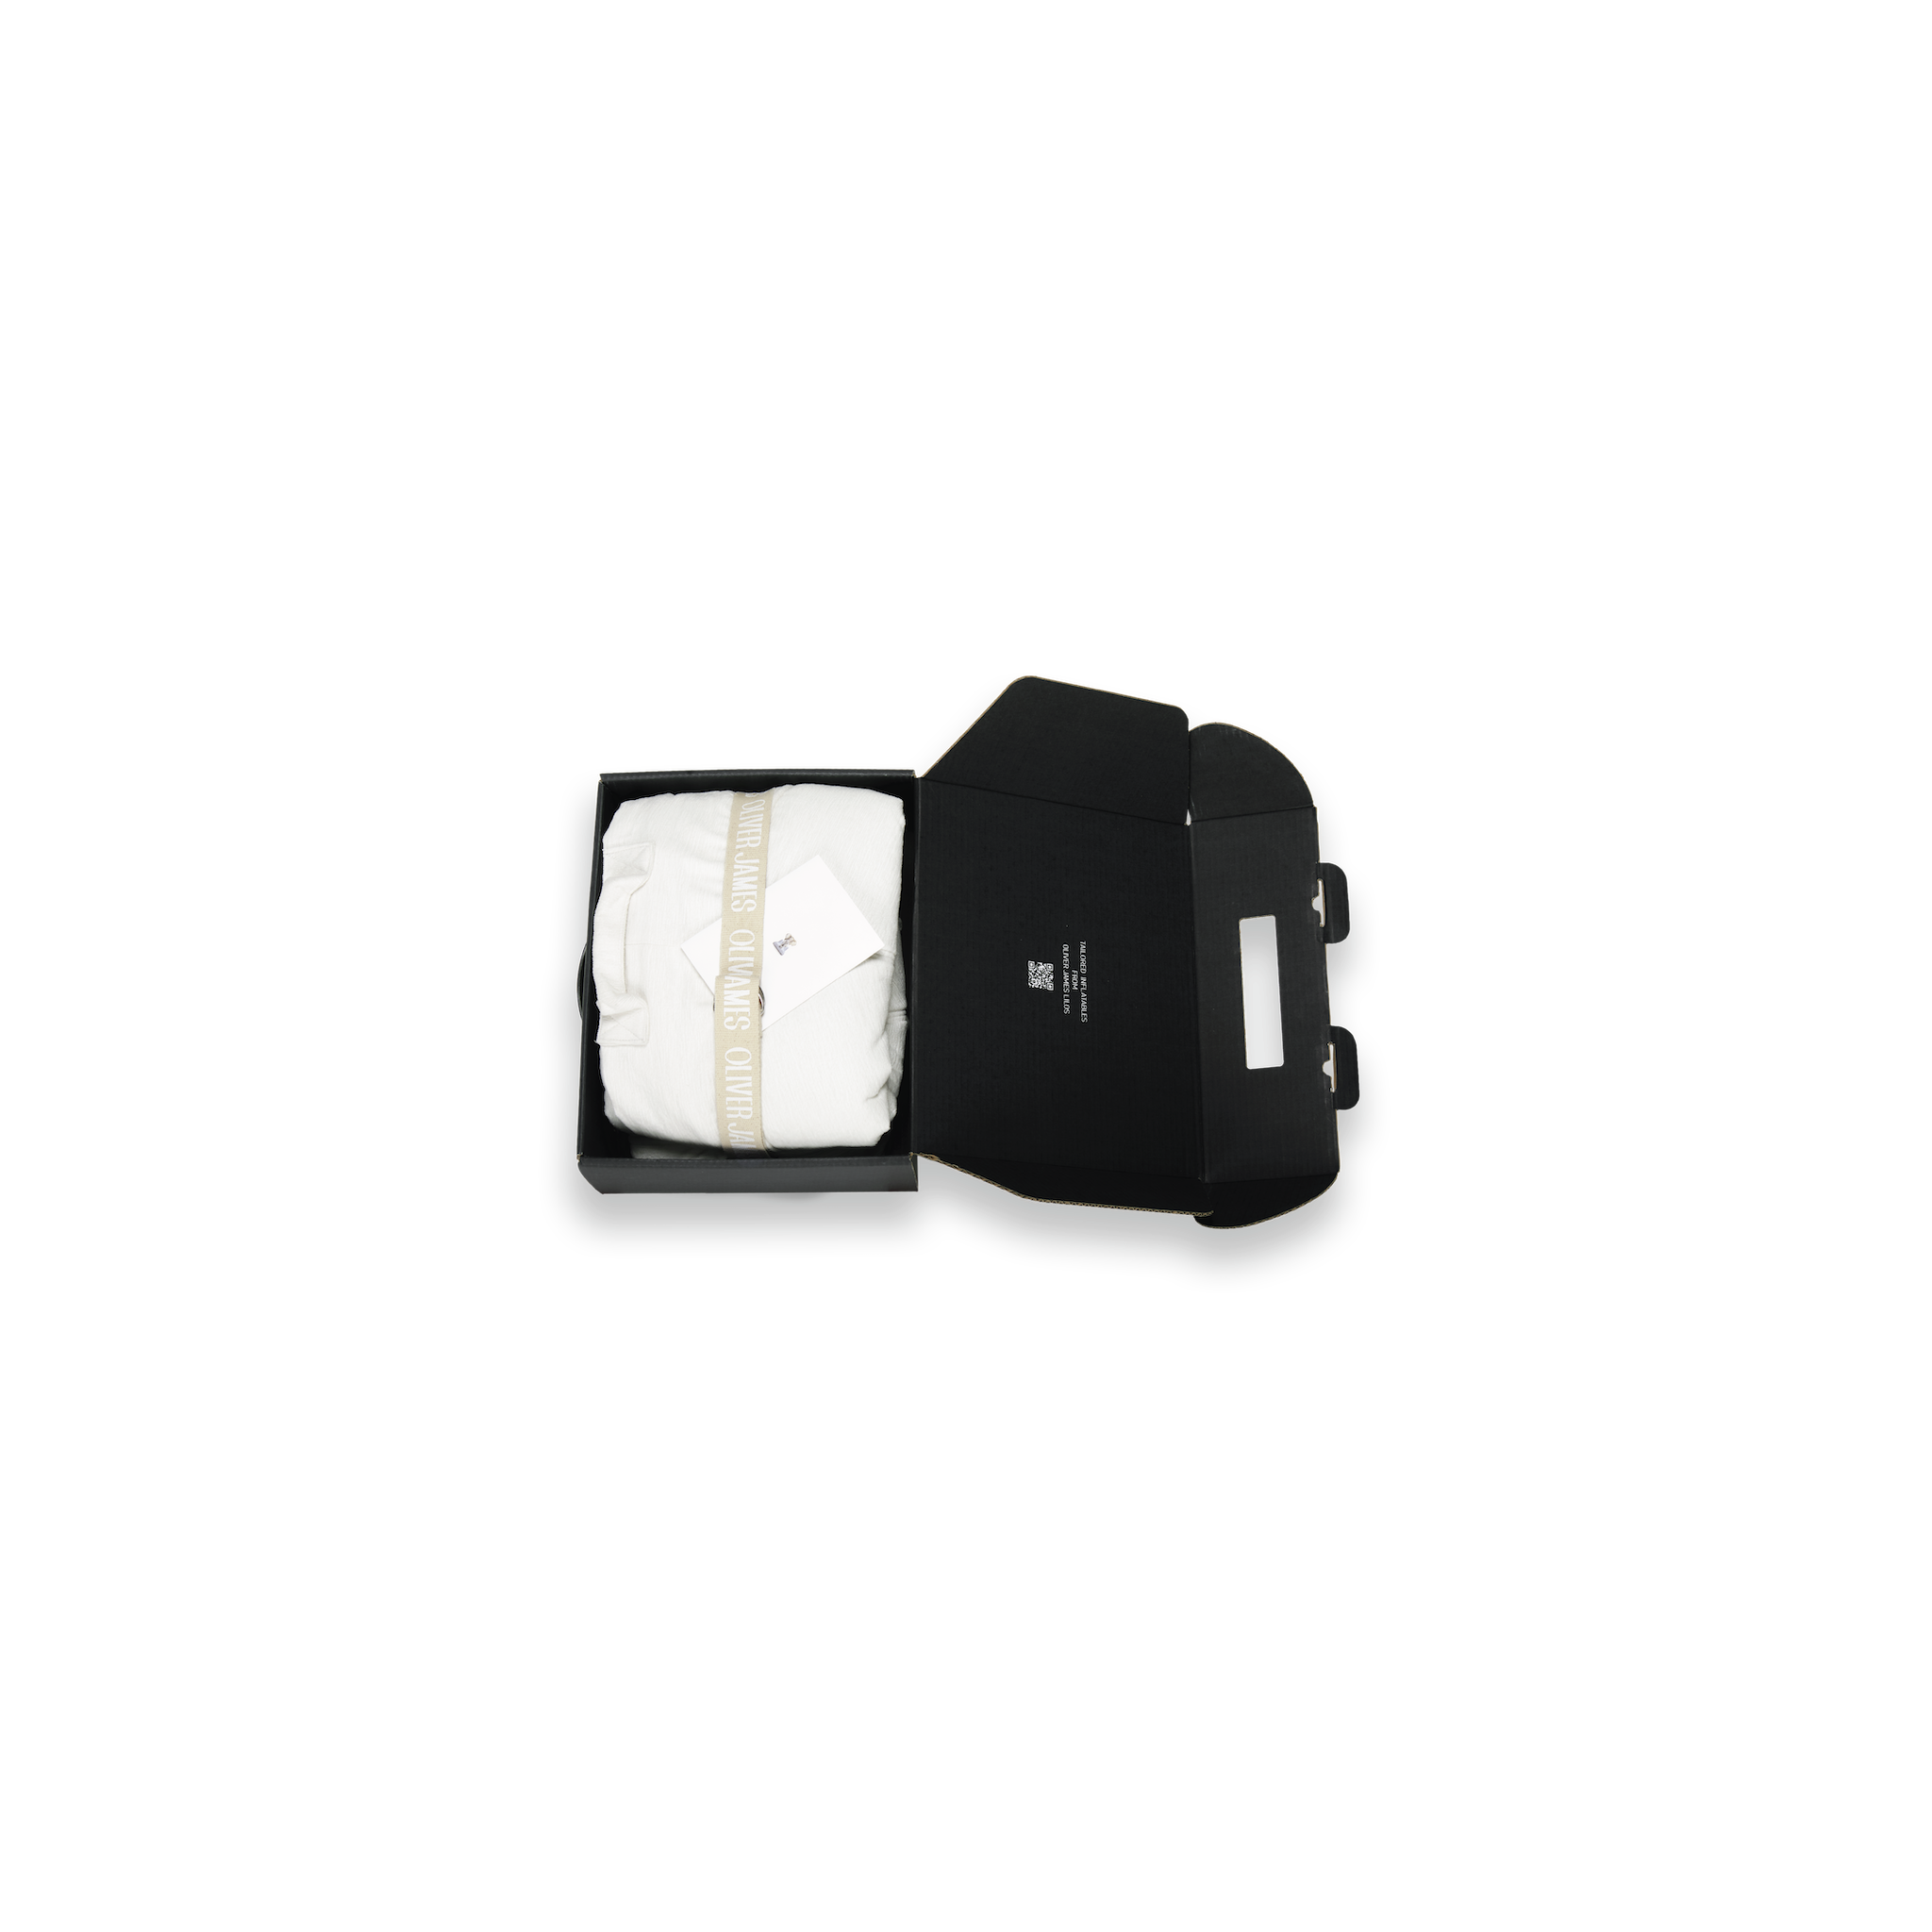 A ring white terry toweled inflatable luxury pool float lounger cover folded in black box box with a belt, card and pump.